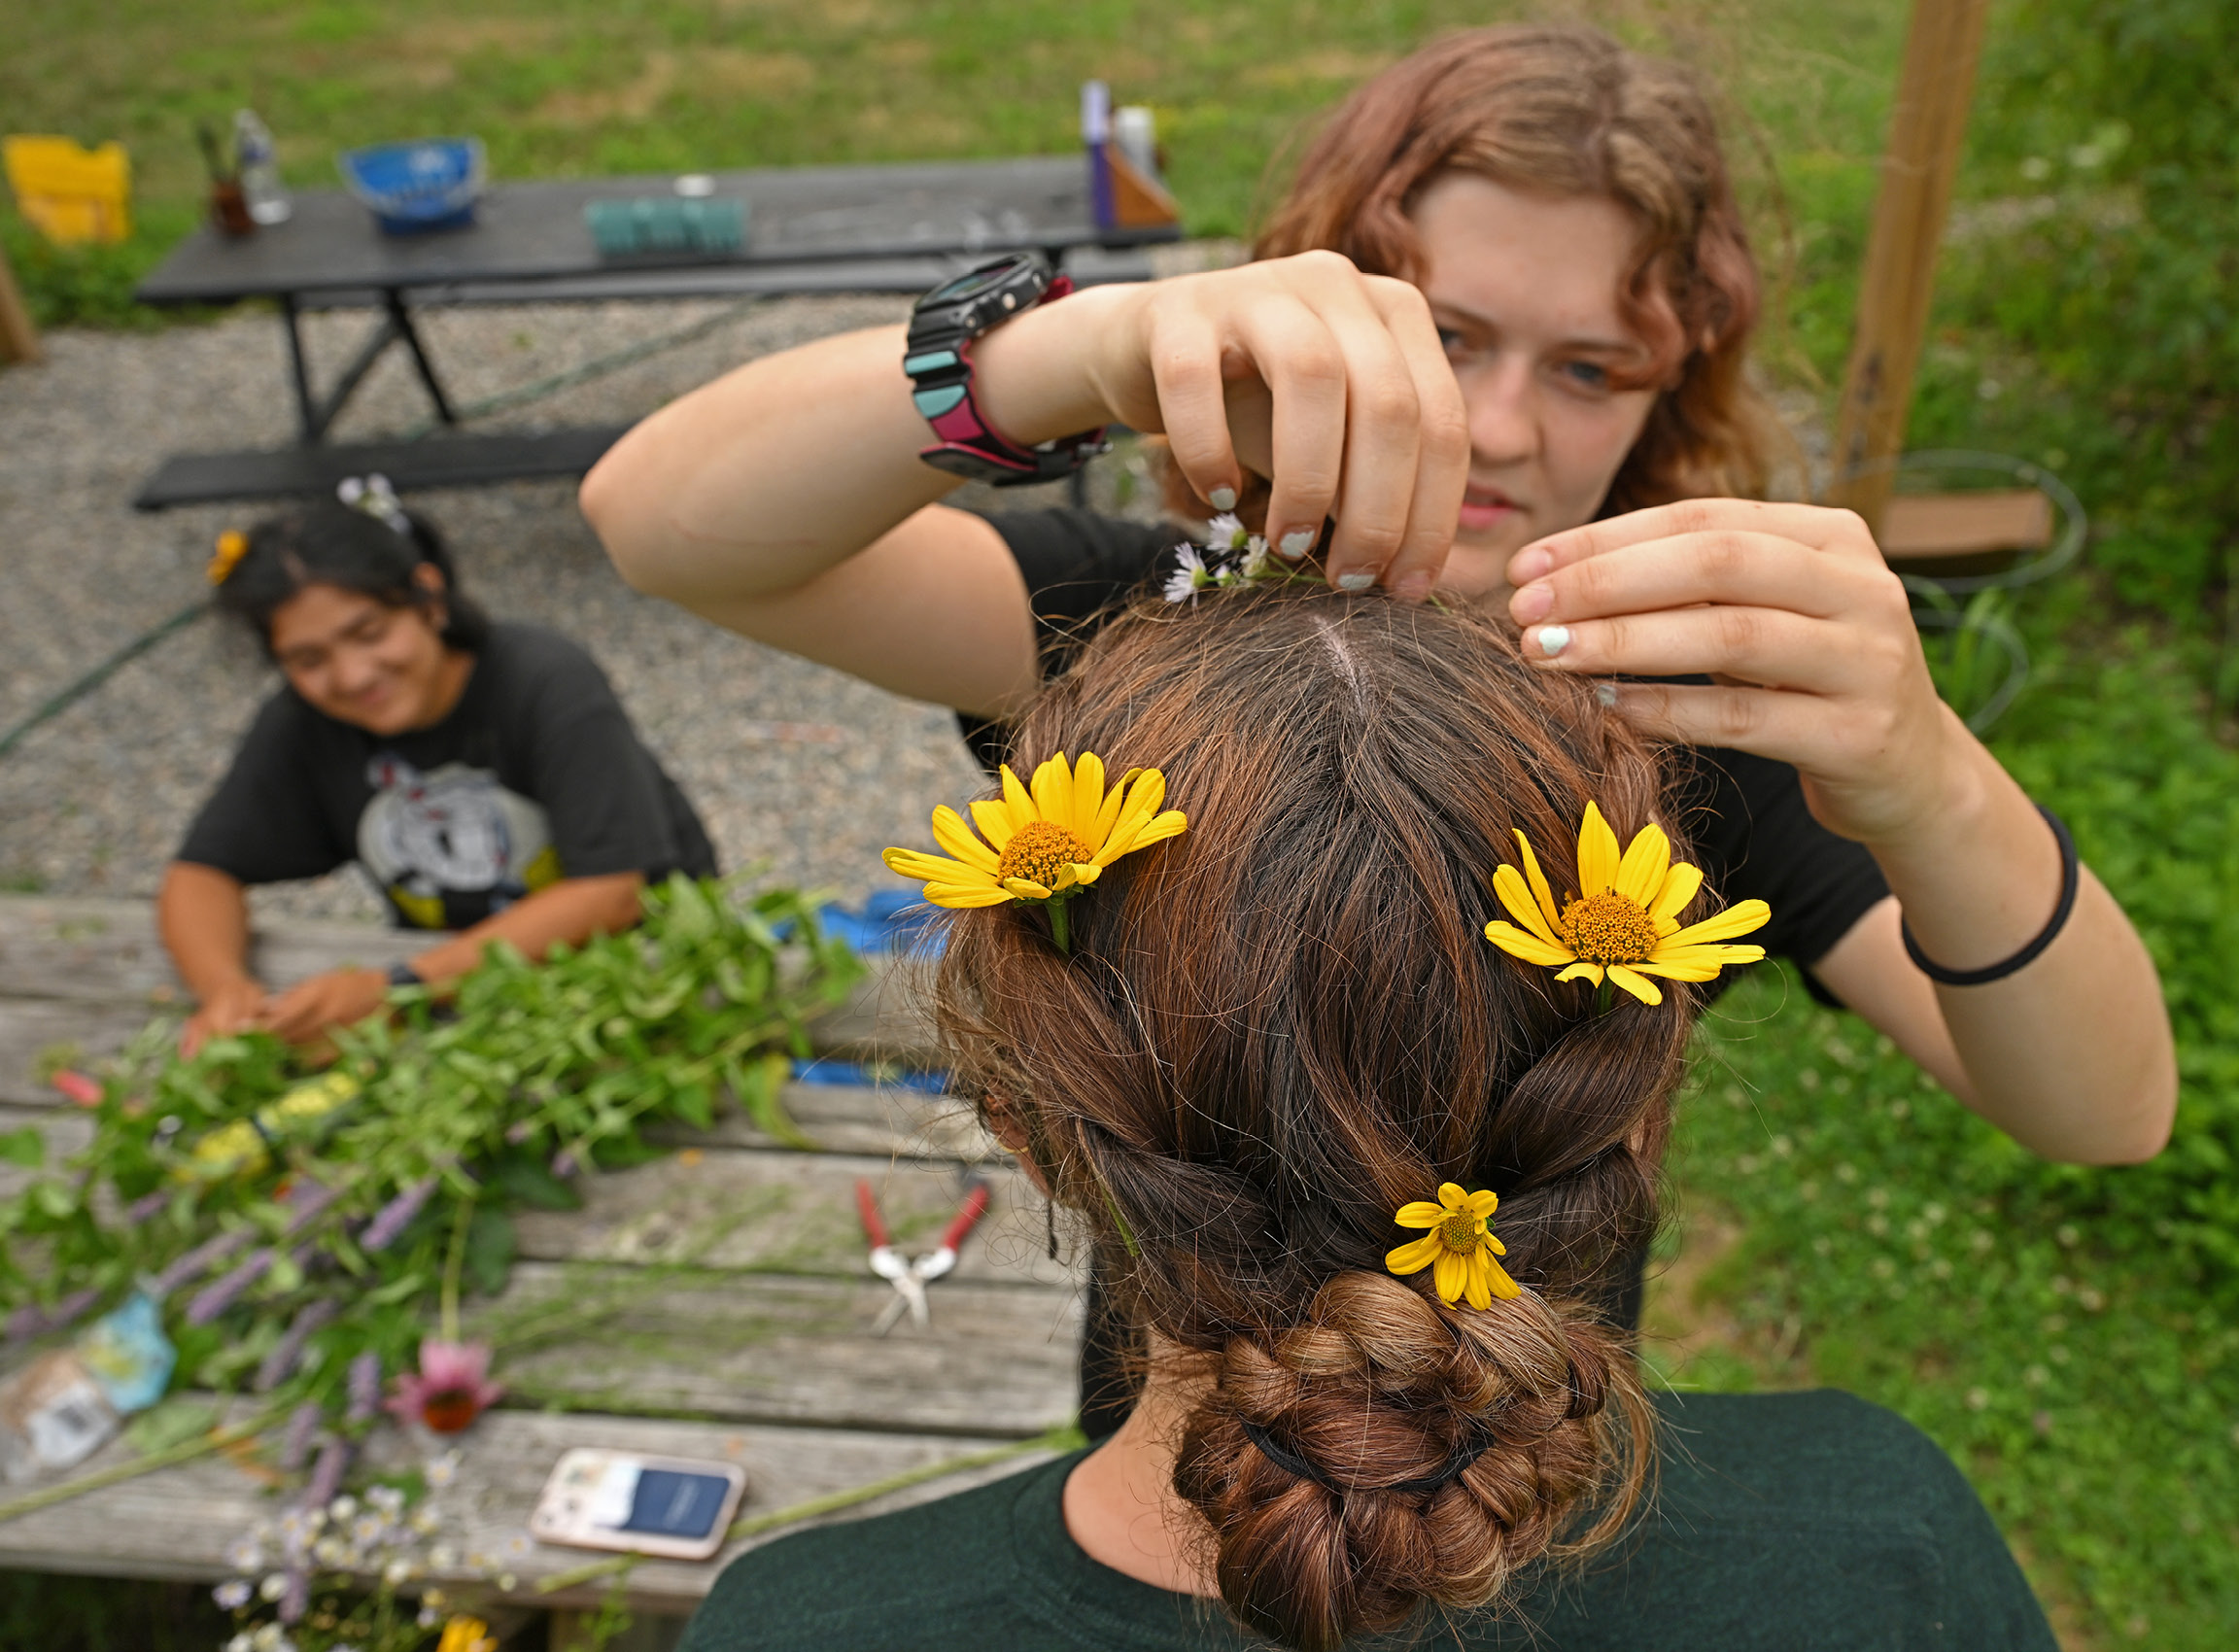 A Sprout worker ties flowers in another worker's hair